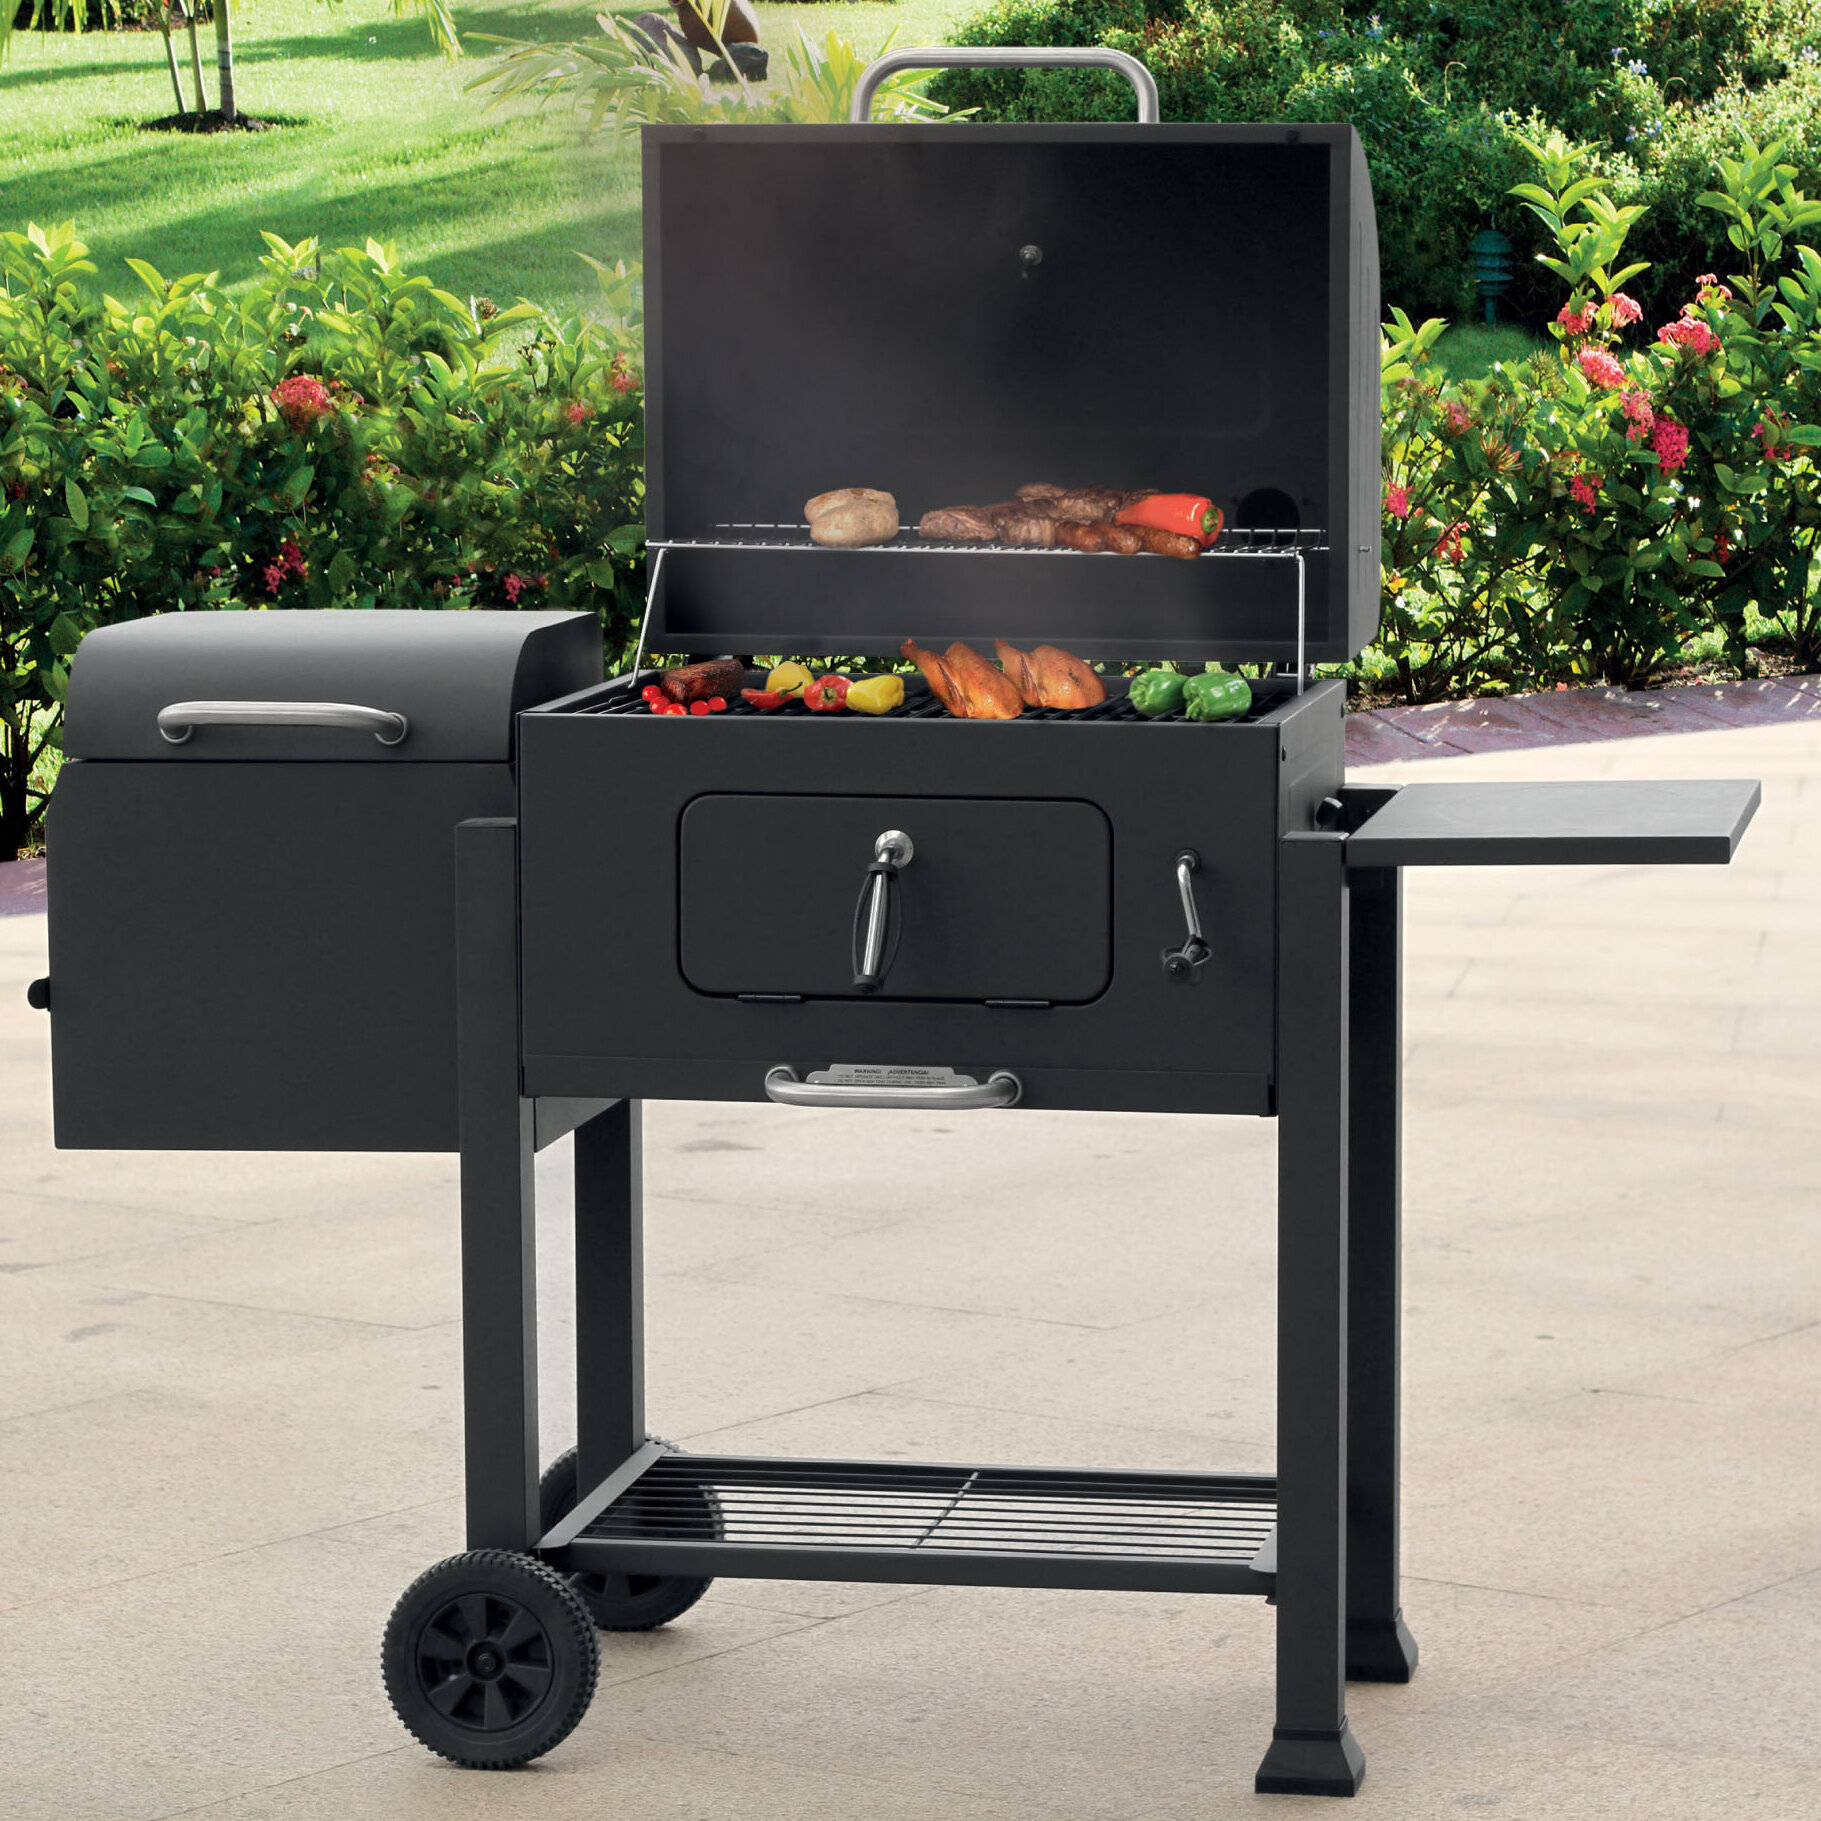 Steel Barbeque Charcoal Grill with Smoker Box